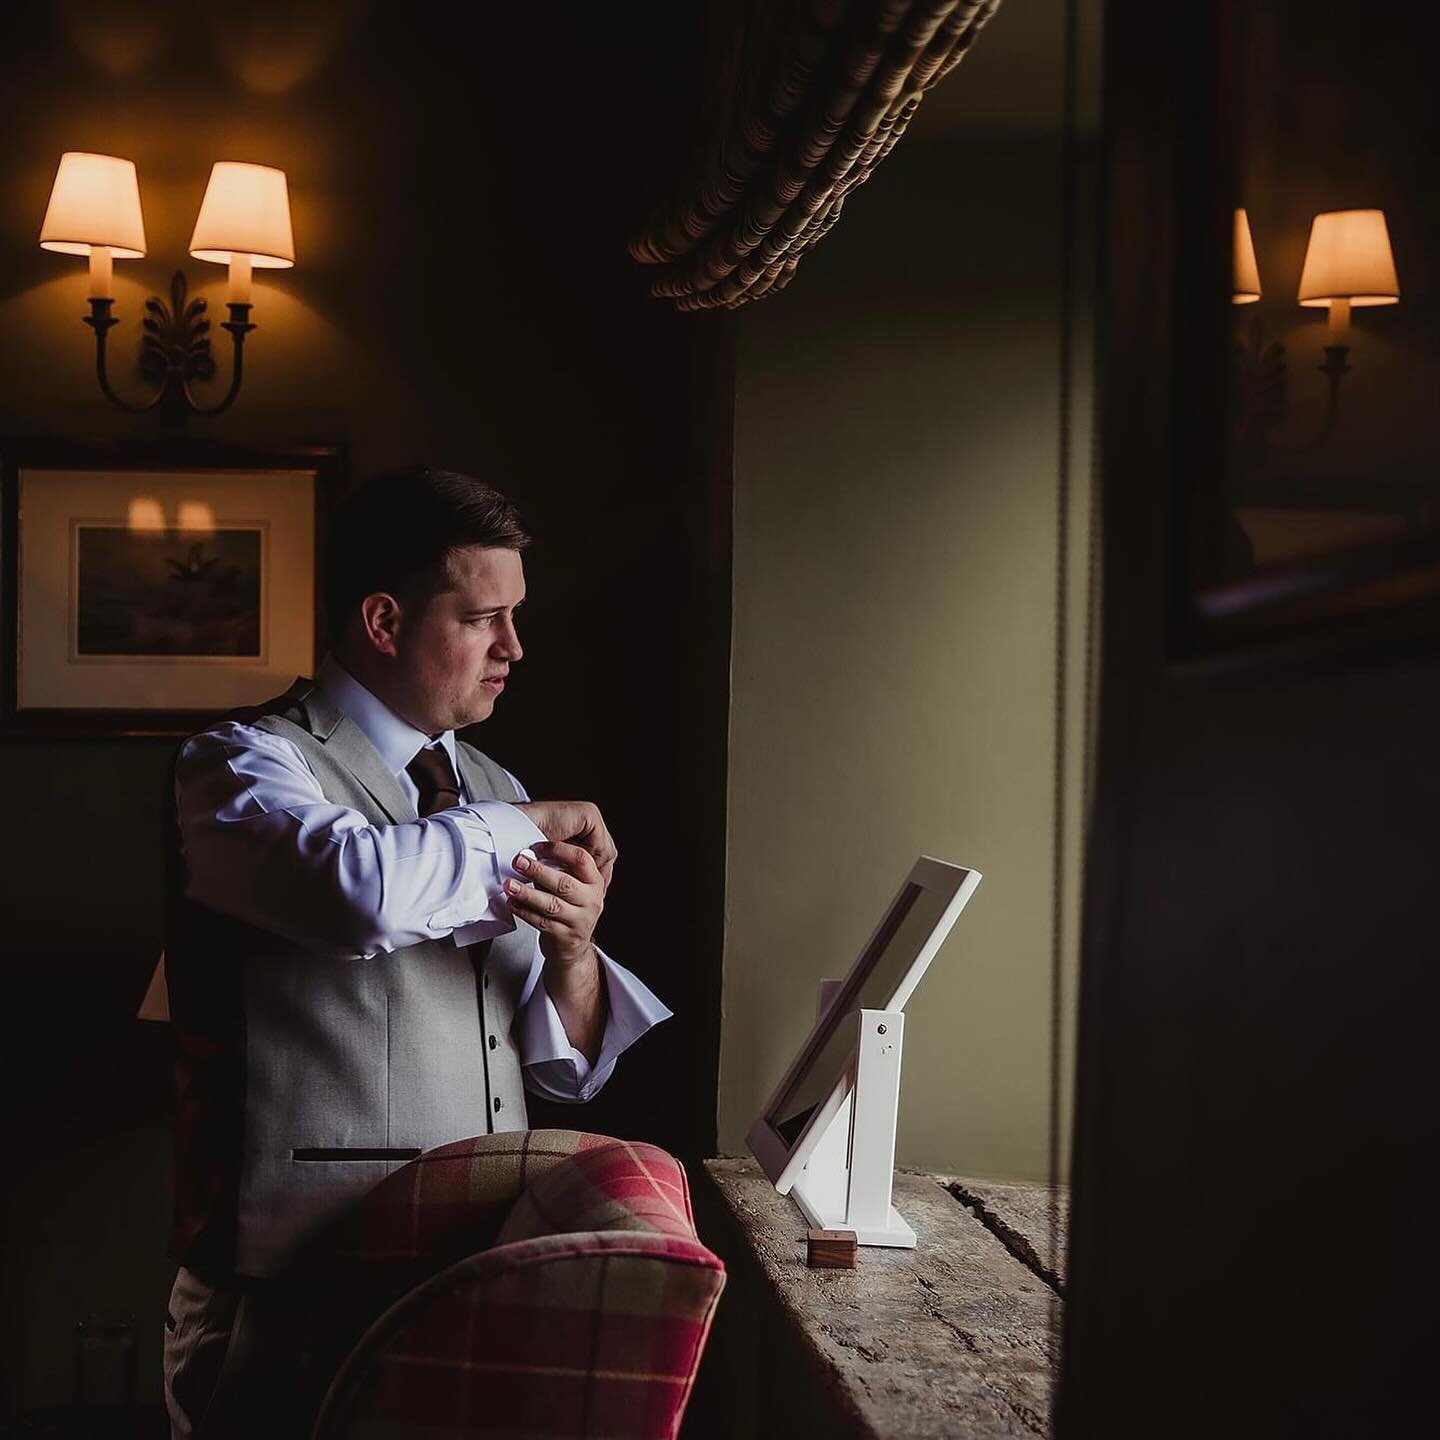 Luke and Shelley&rsquo;s wedding at Bruisyard Country Estate was a doozy (that&rsquo;s a good thing btw!!)!

Luke is a project manager and it was clear to see how much work had been put into their stunning day. But the attention to detail didn&rsquo;